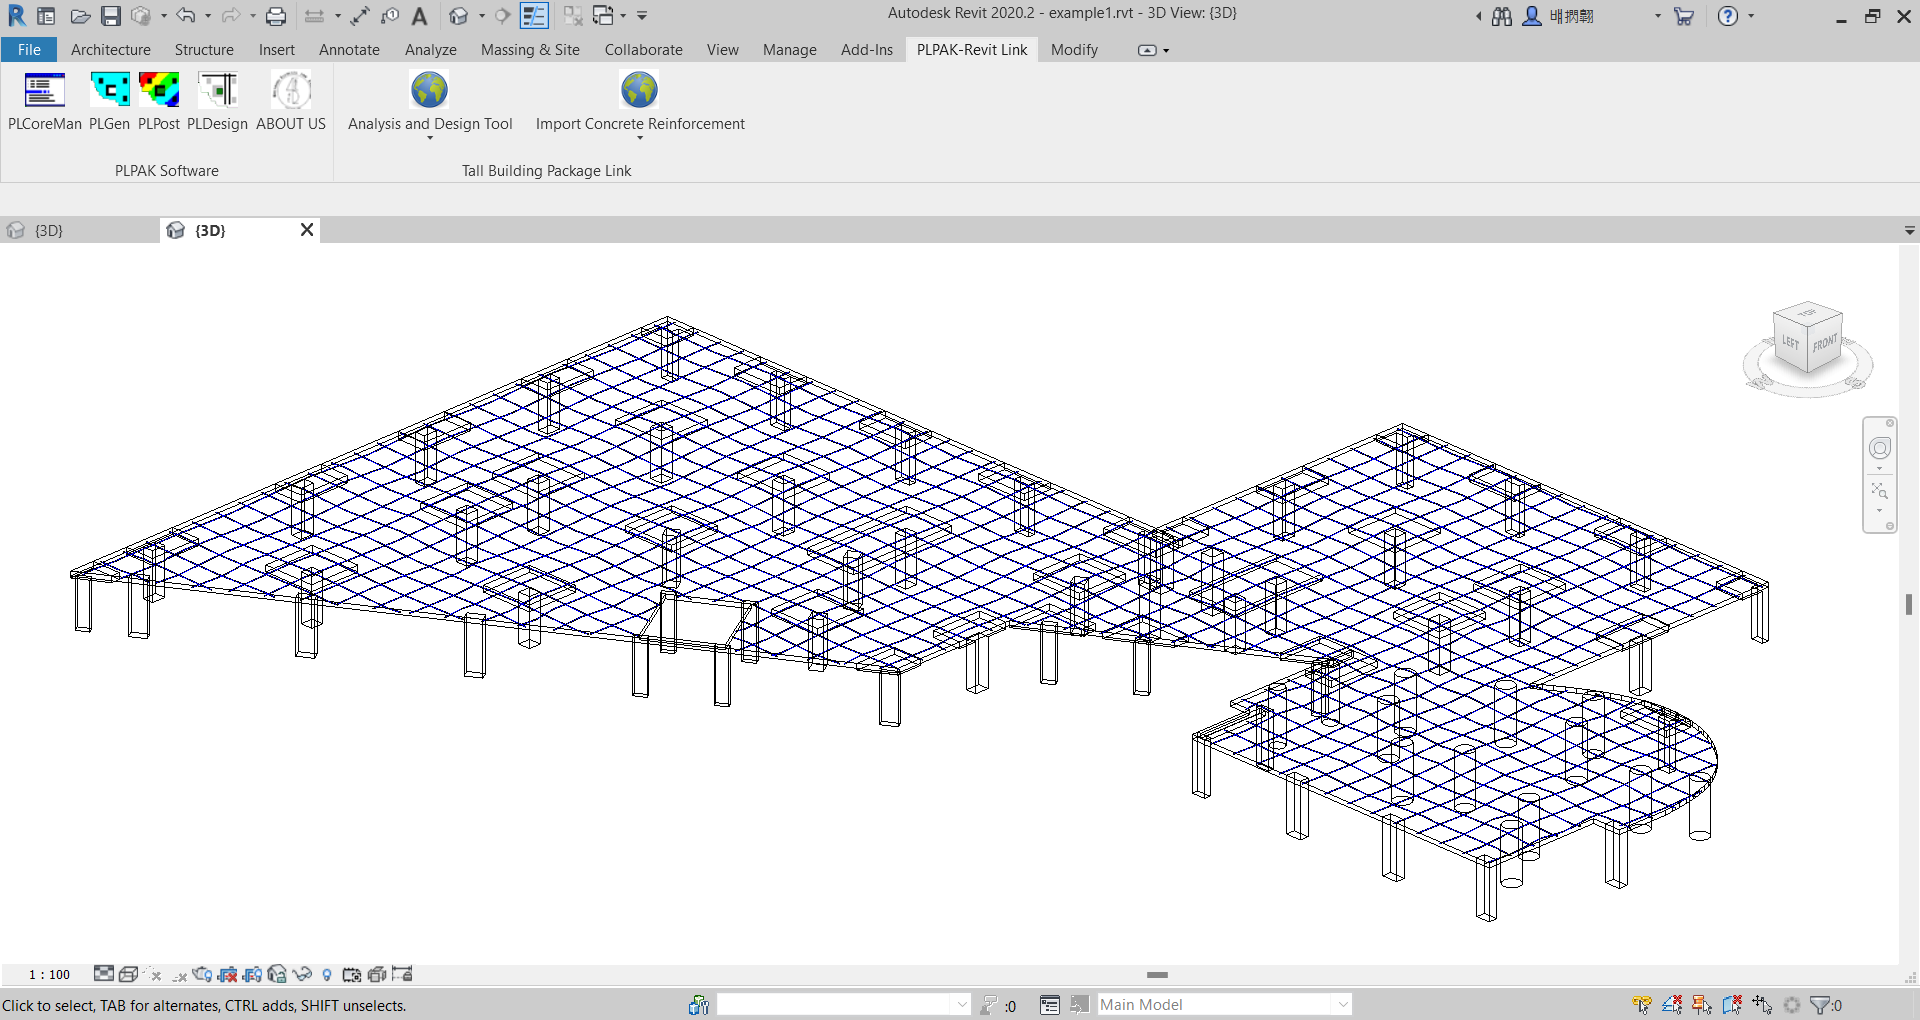 Automatically drawn and profiled post-tension cables exported to Autodesk Revit